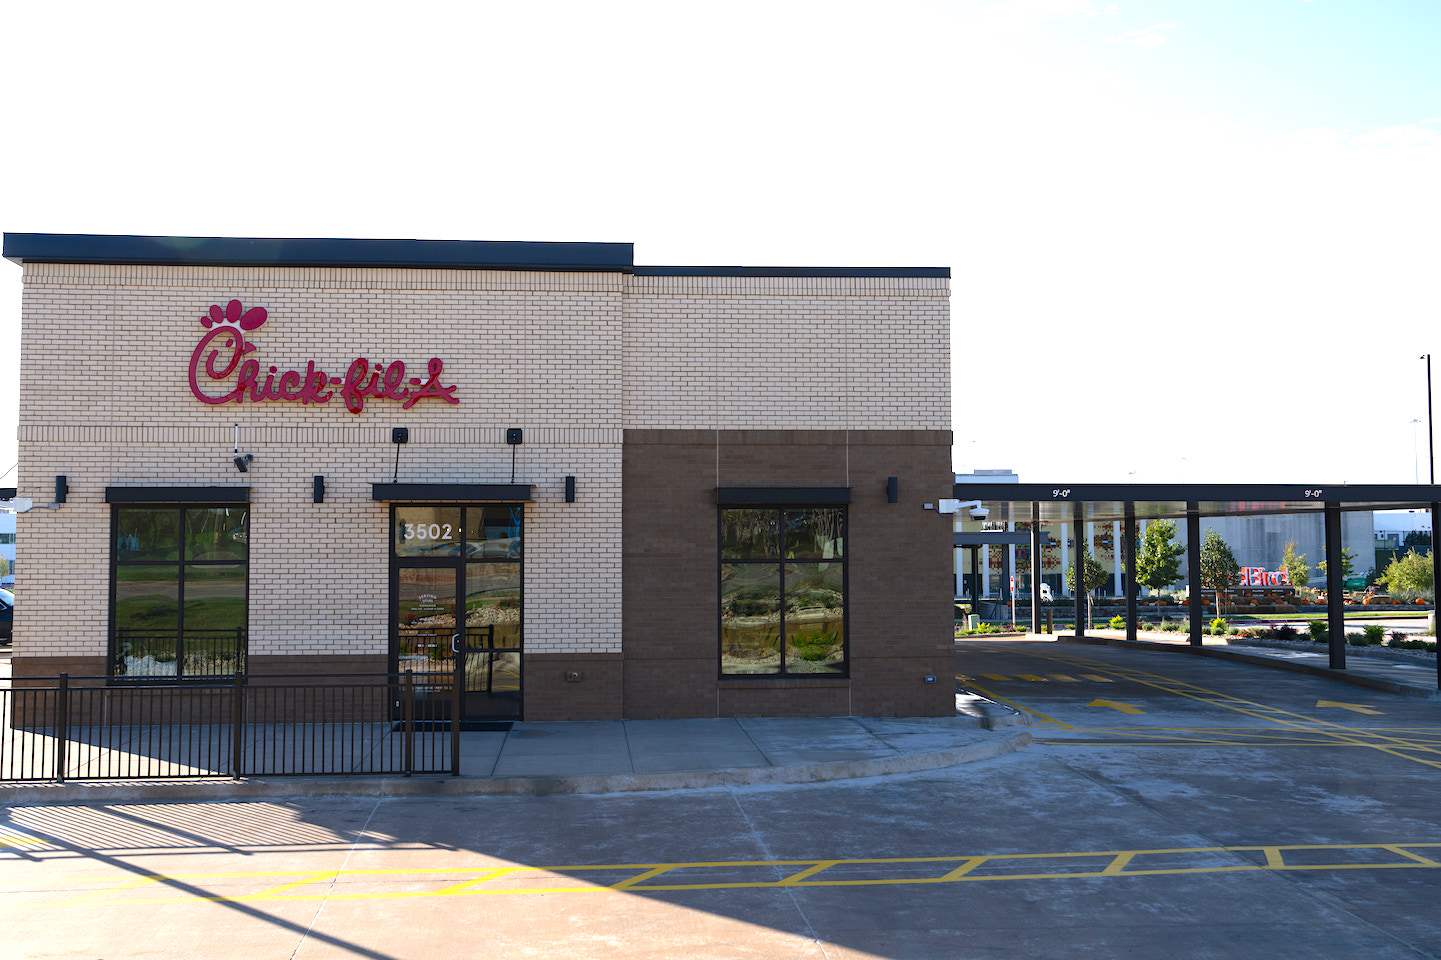 The exterior of the Chick-fil-A RedBird location in the historic and revitalized RedBird neighborhood of Dallas, Texas.